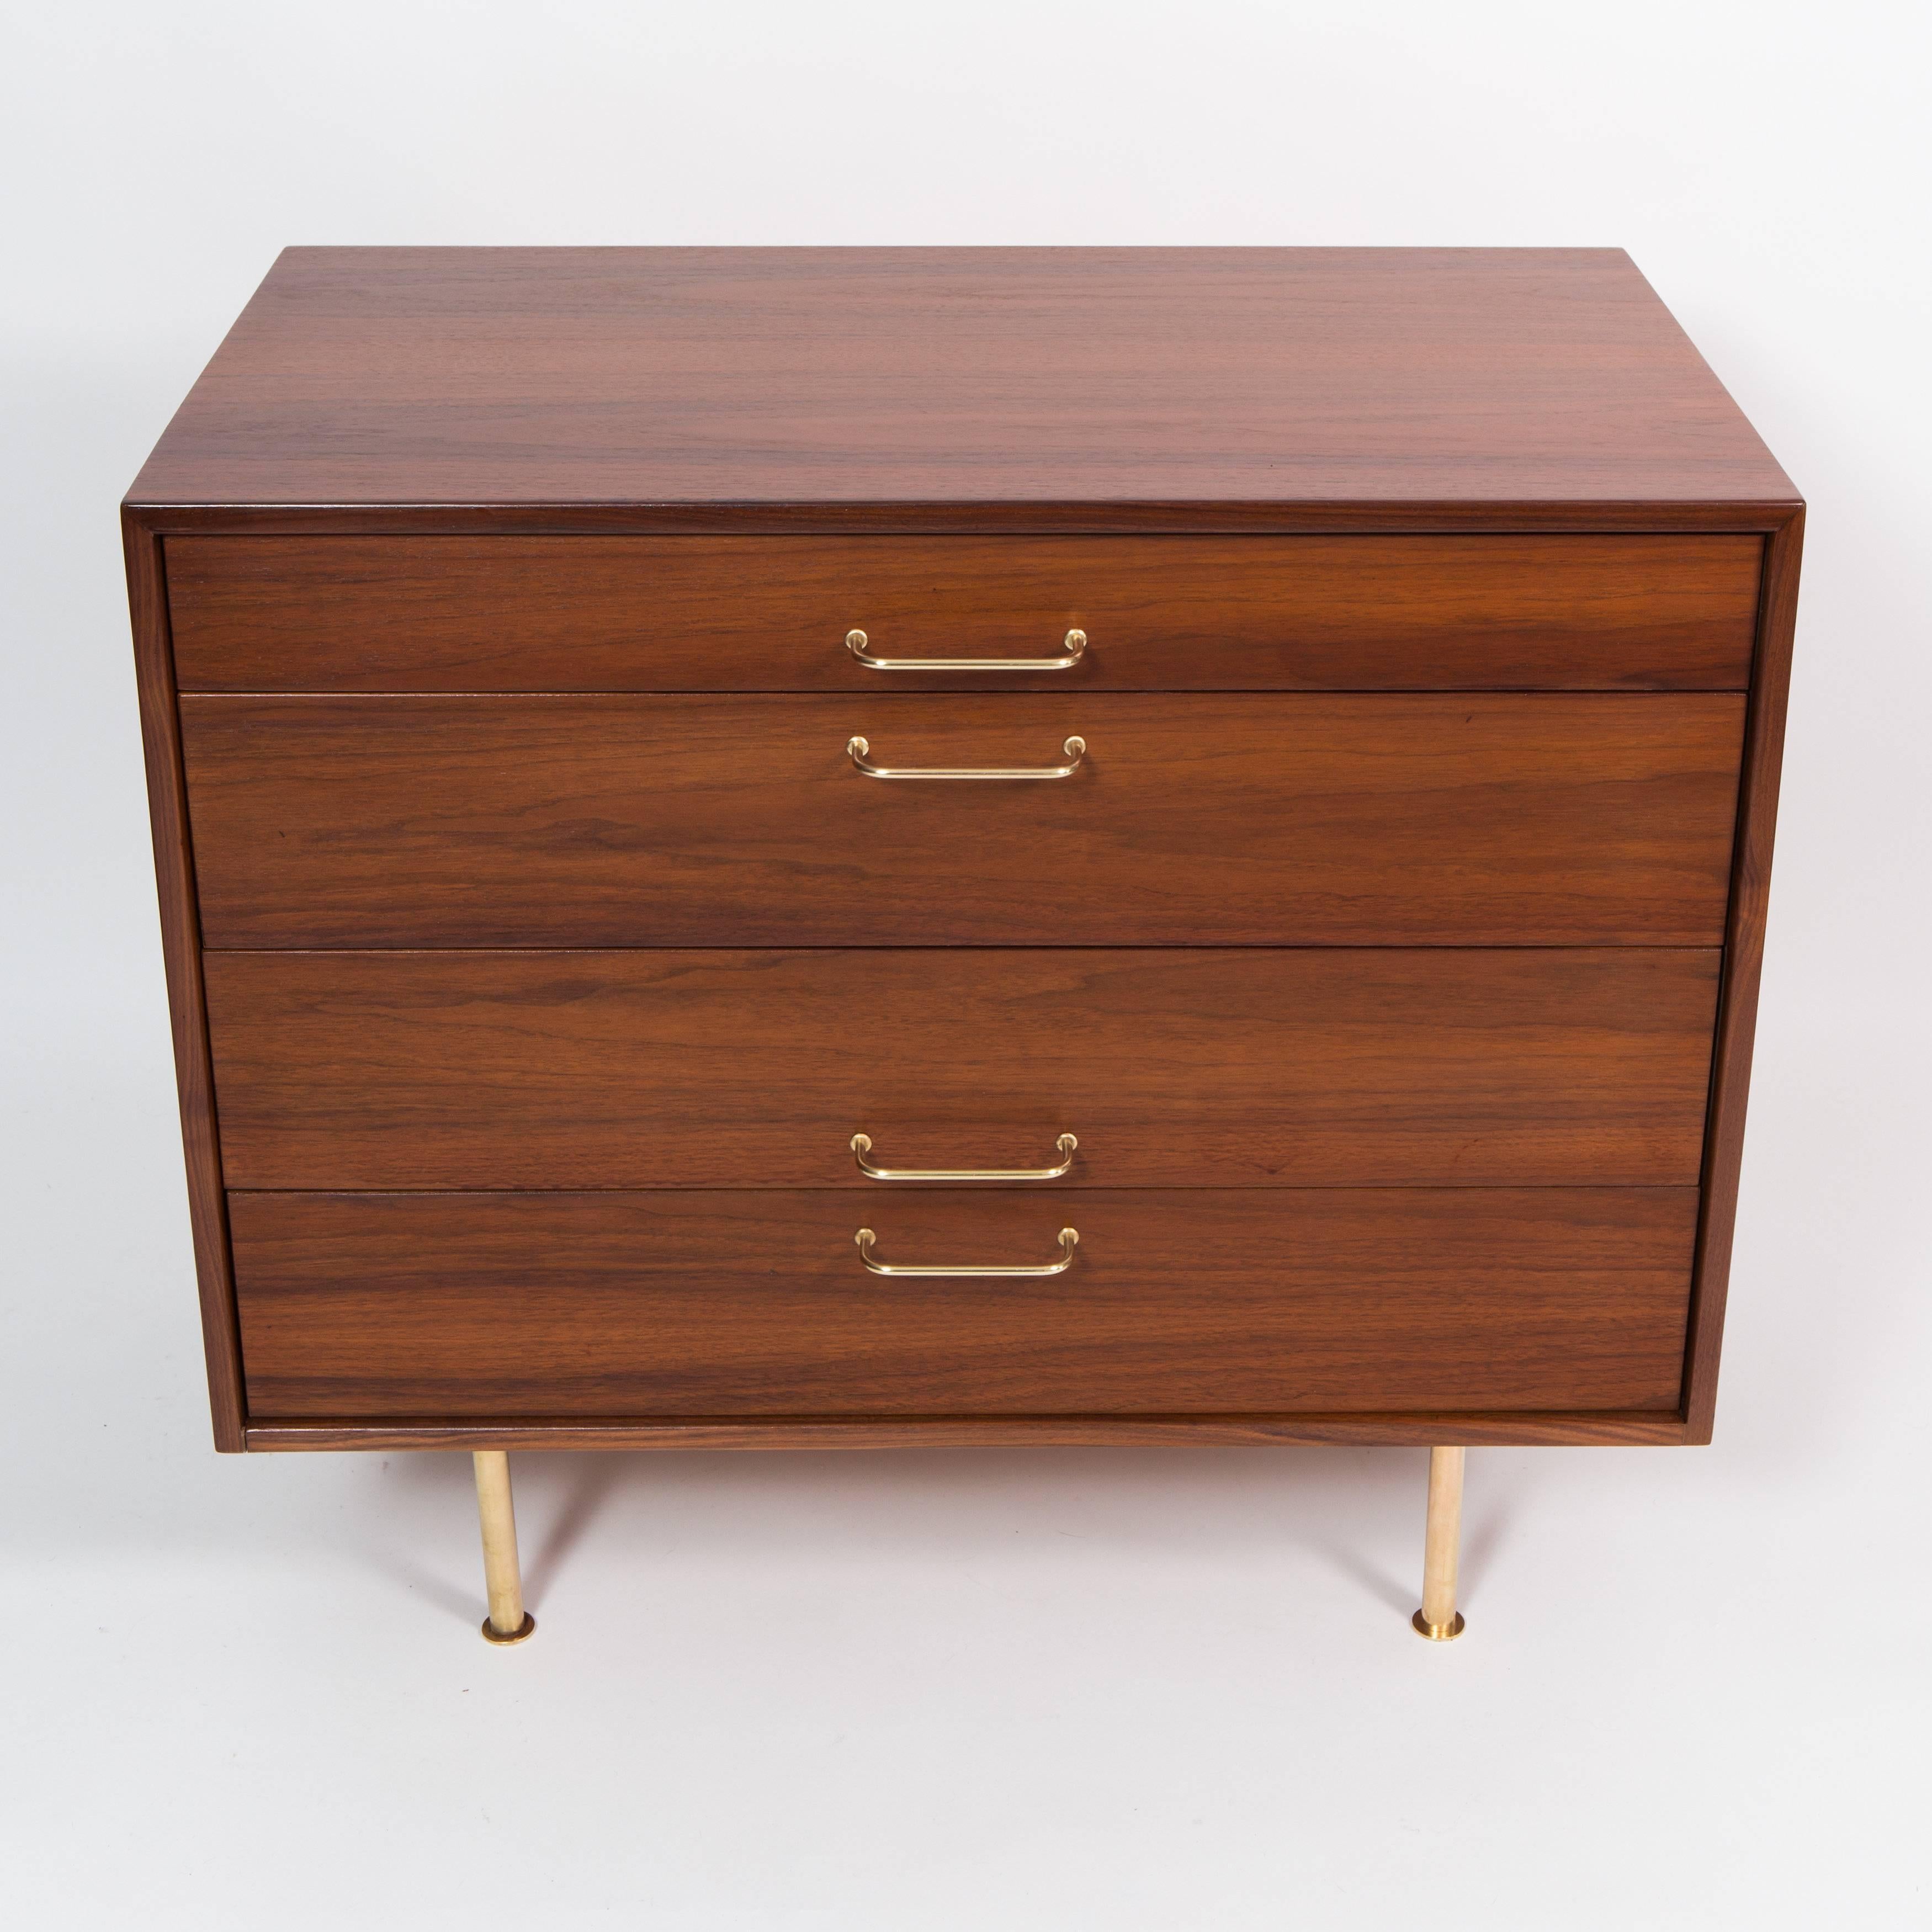 Beautifully figured walnut dresser on brass legs, 1950s.  Coordinating dresser with cabinet available separately.